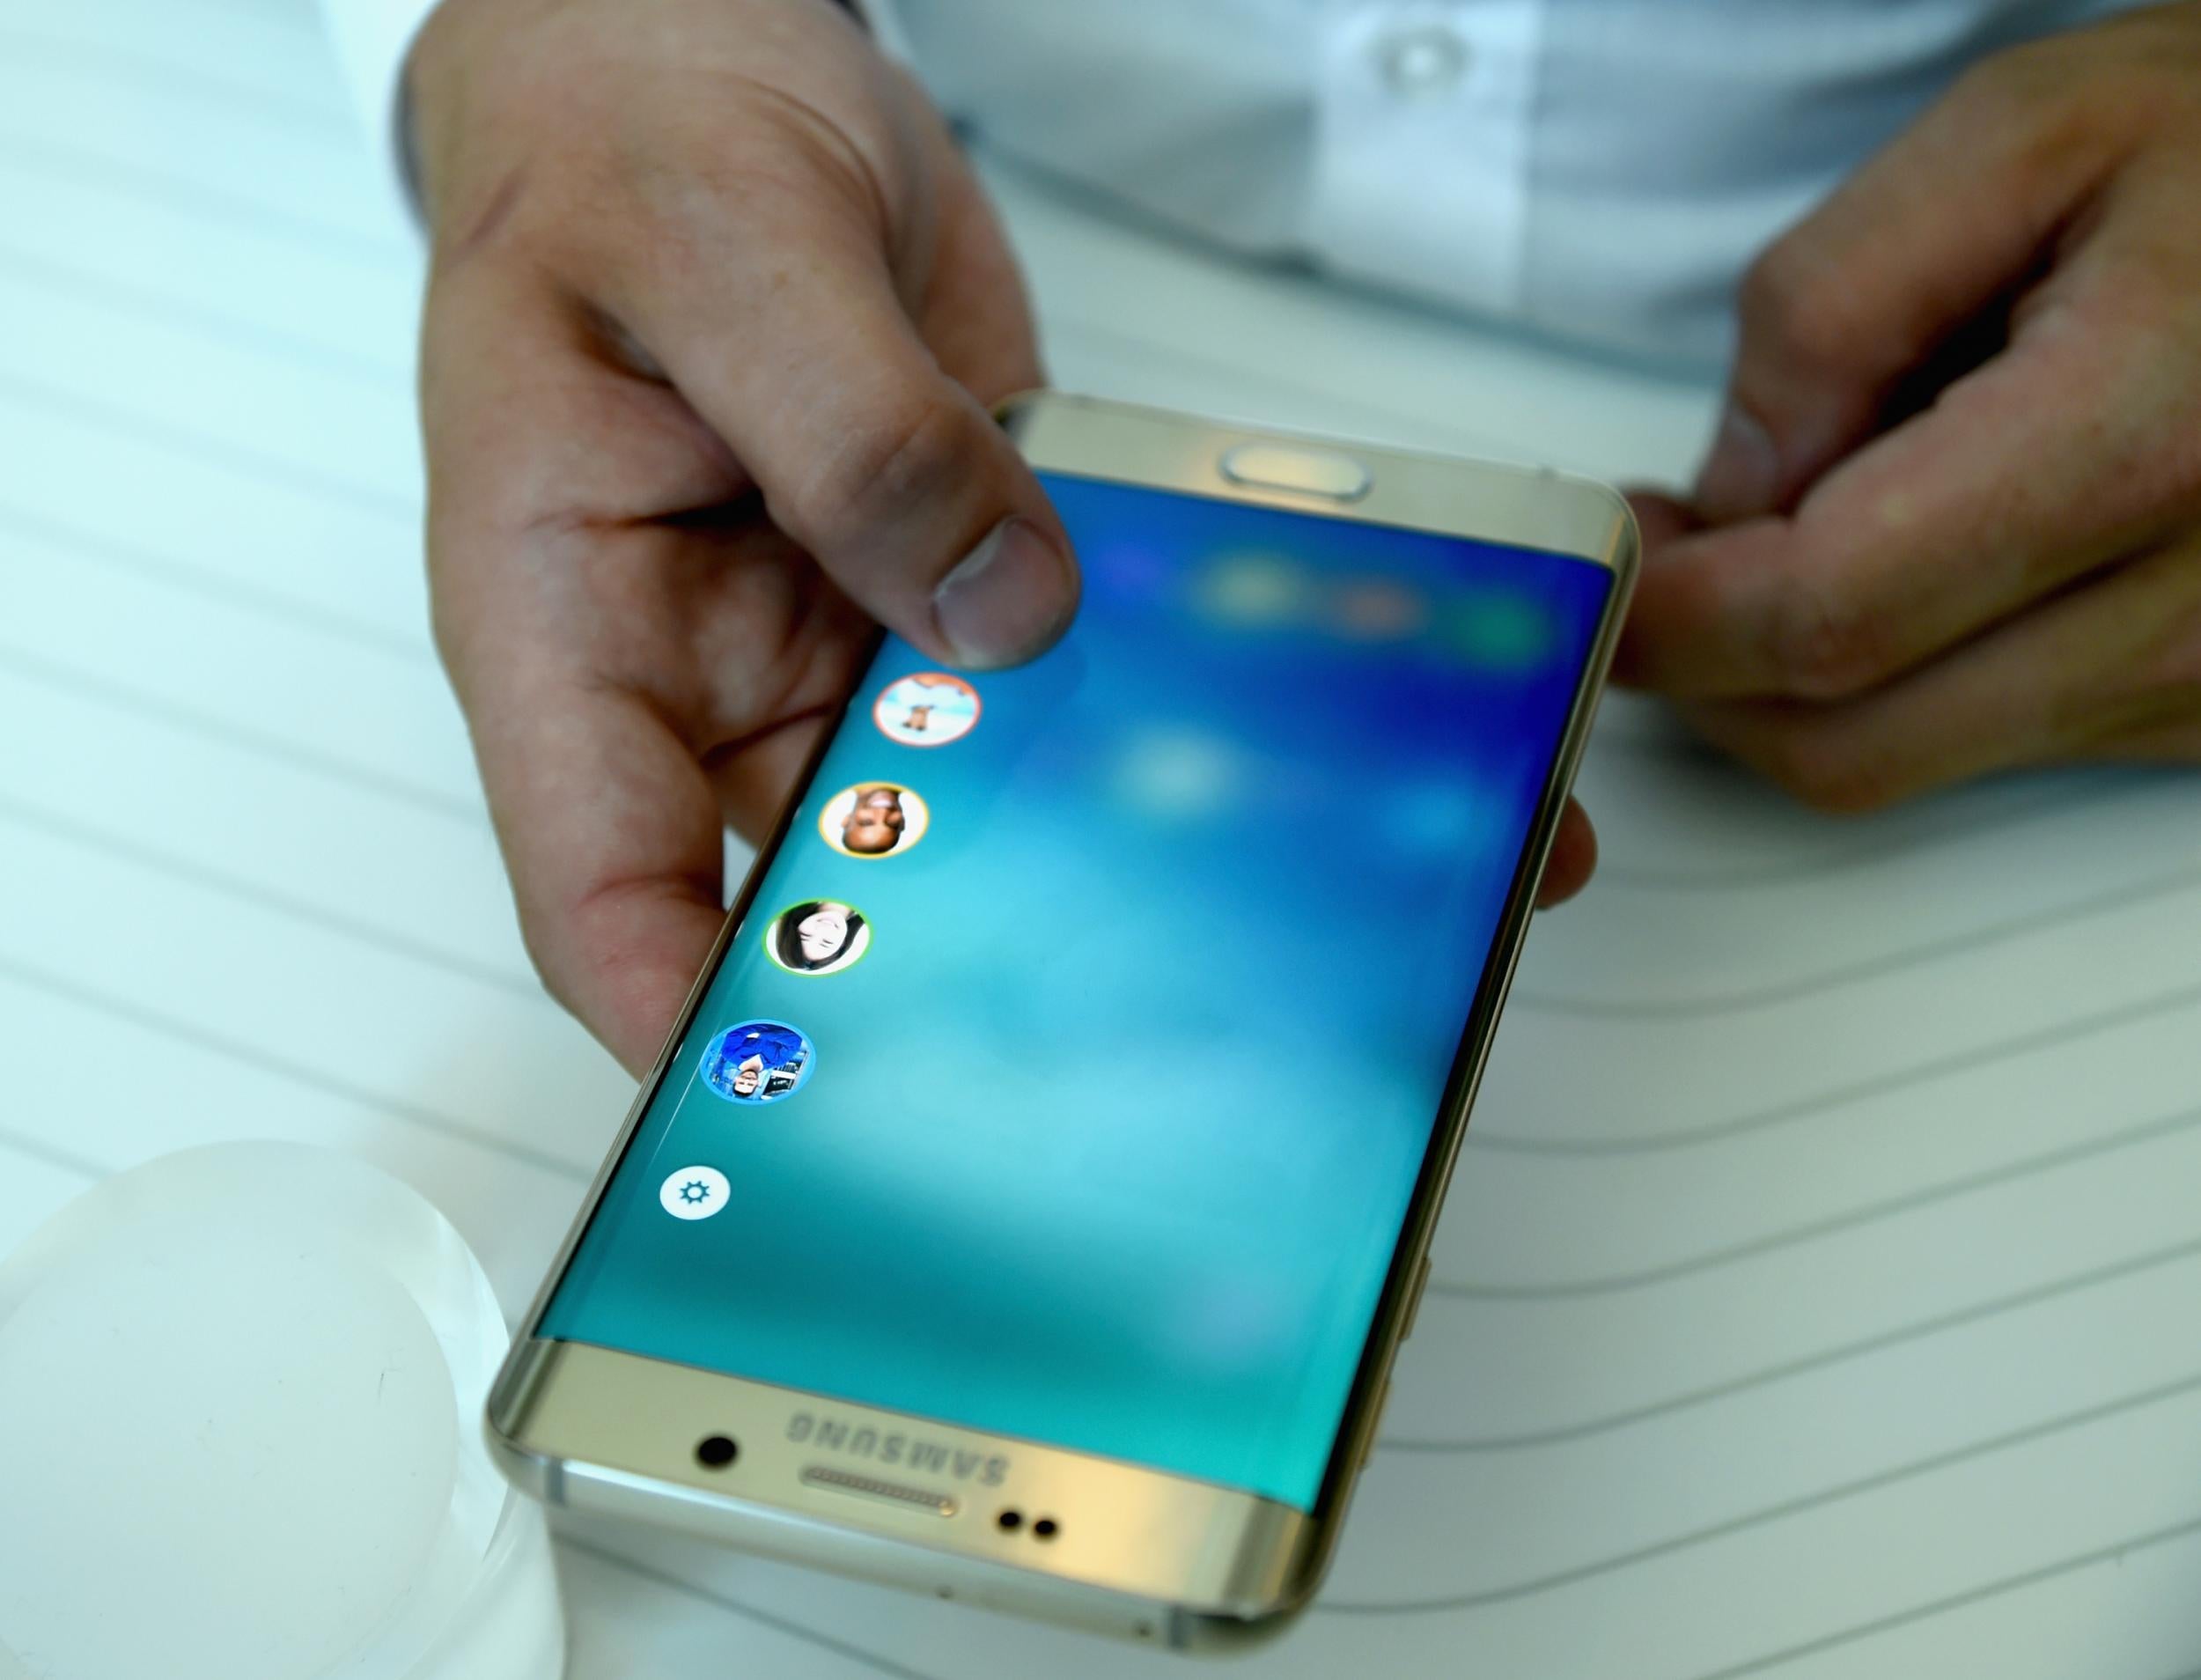 The Samsung Galaxy S6 Edge+ was unveiled at the last Unpacked event in August 2015